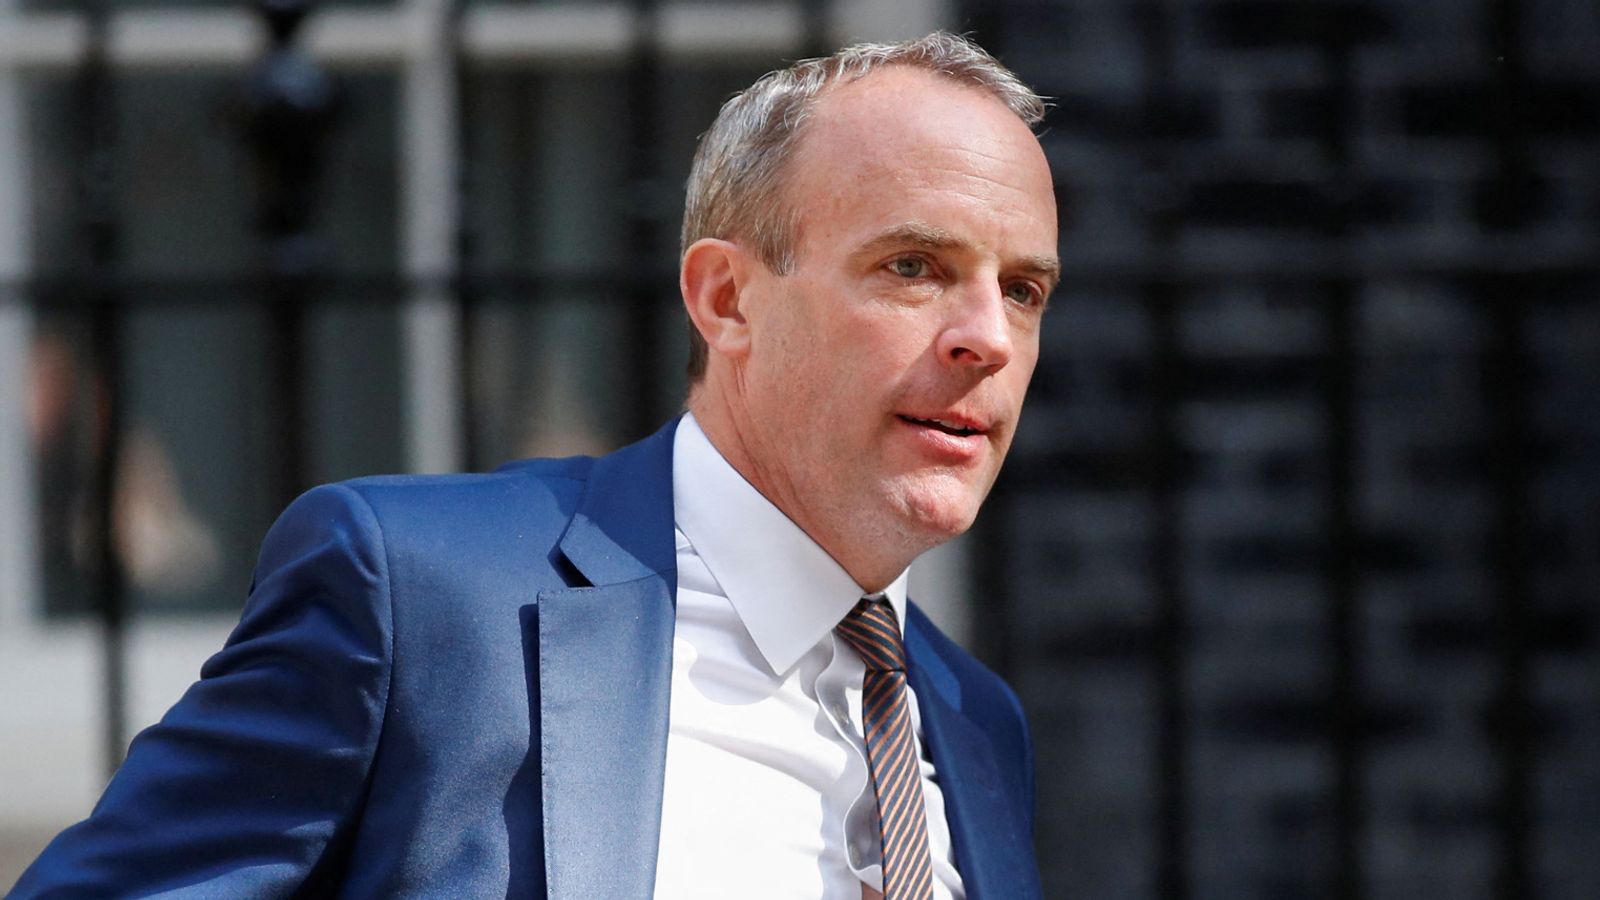 Dominic Raab under the spotlight: What has led to the deputy prime minister being investigated 